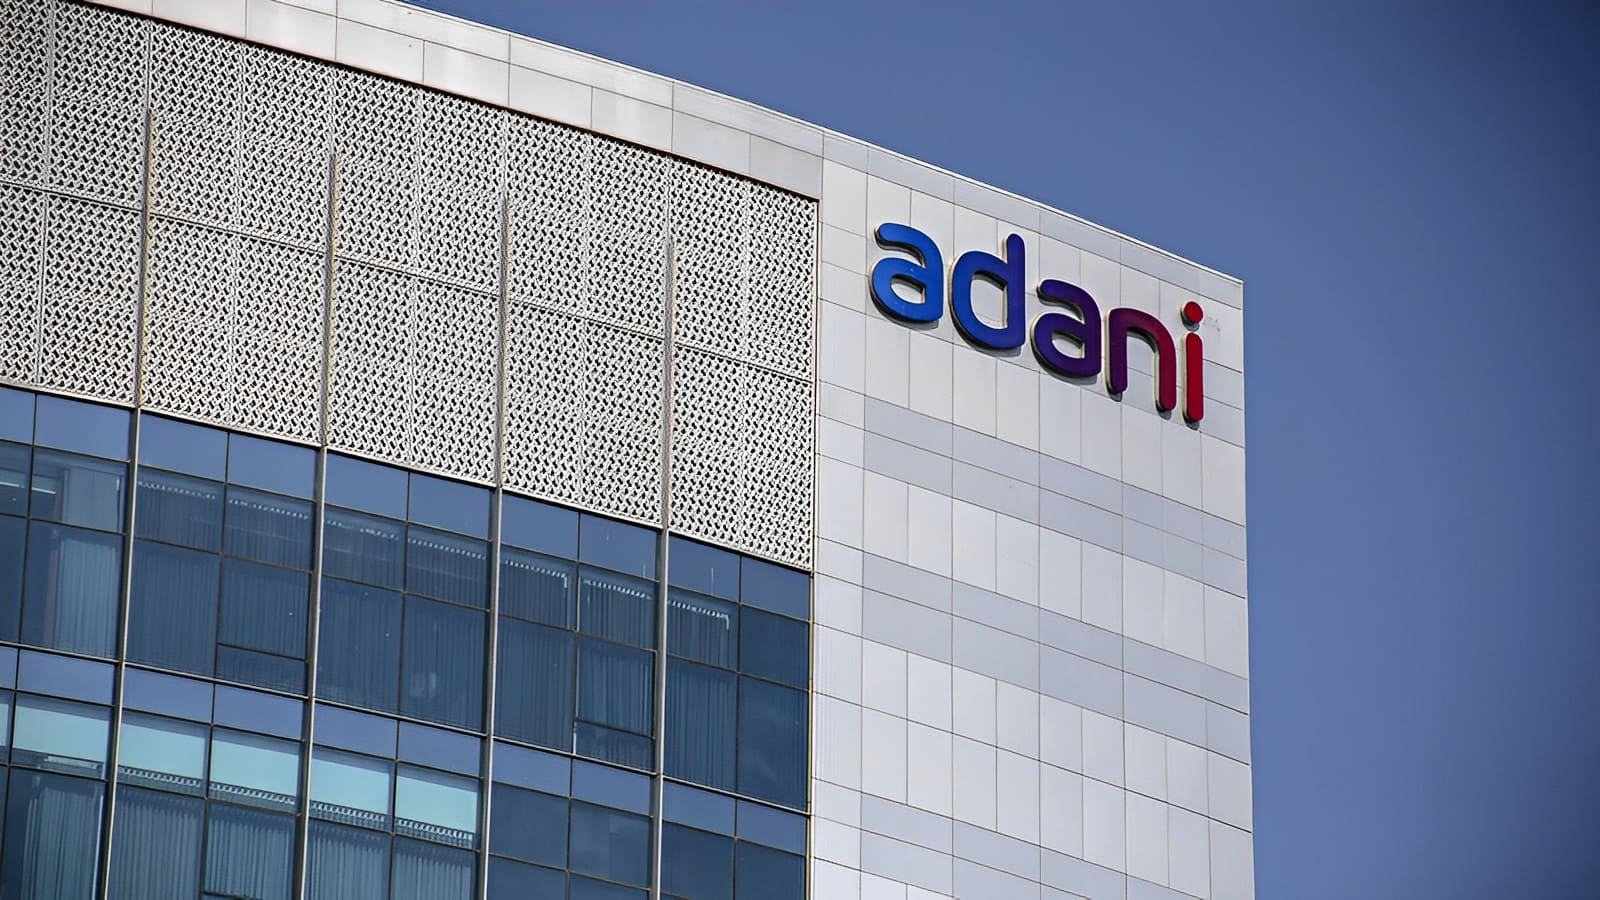 Adani stock surges 10% following Rs 15,000 Cr deal with GQG partners